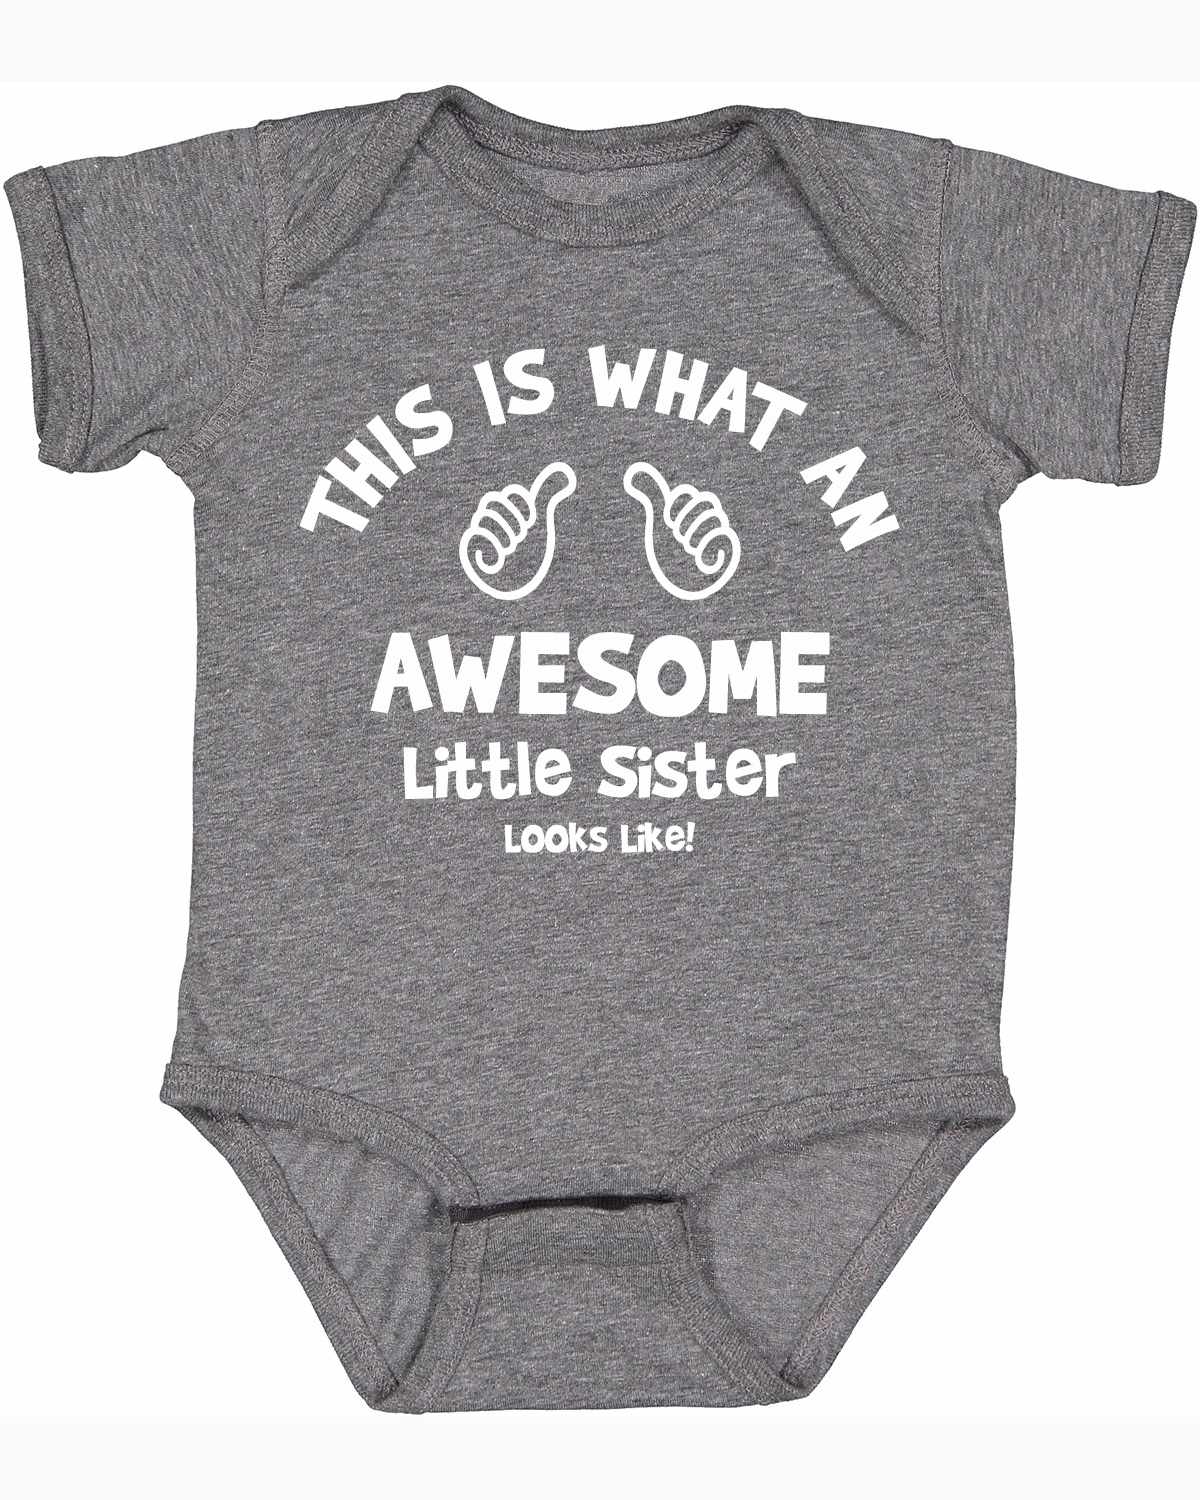 This is What an AWESOME LITTLE SISTER Looks Like Infant BodySuit (#1037-10)